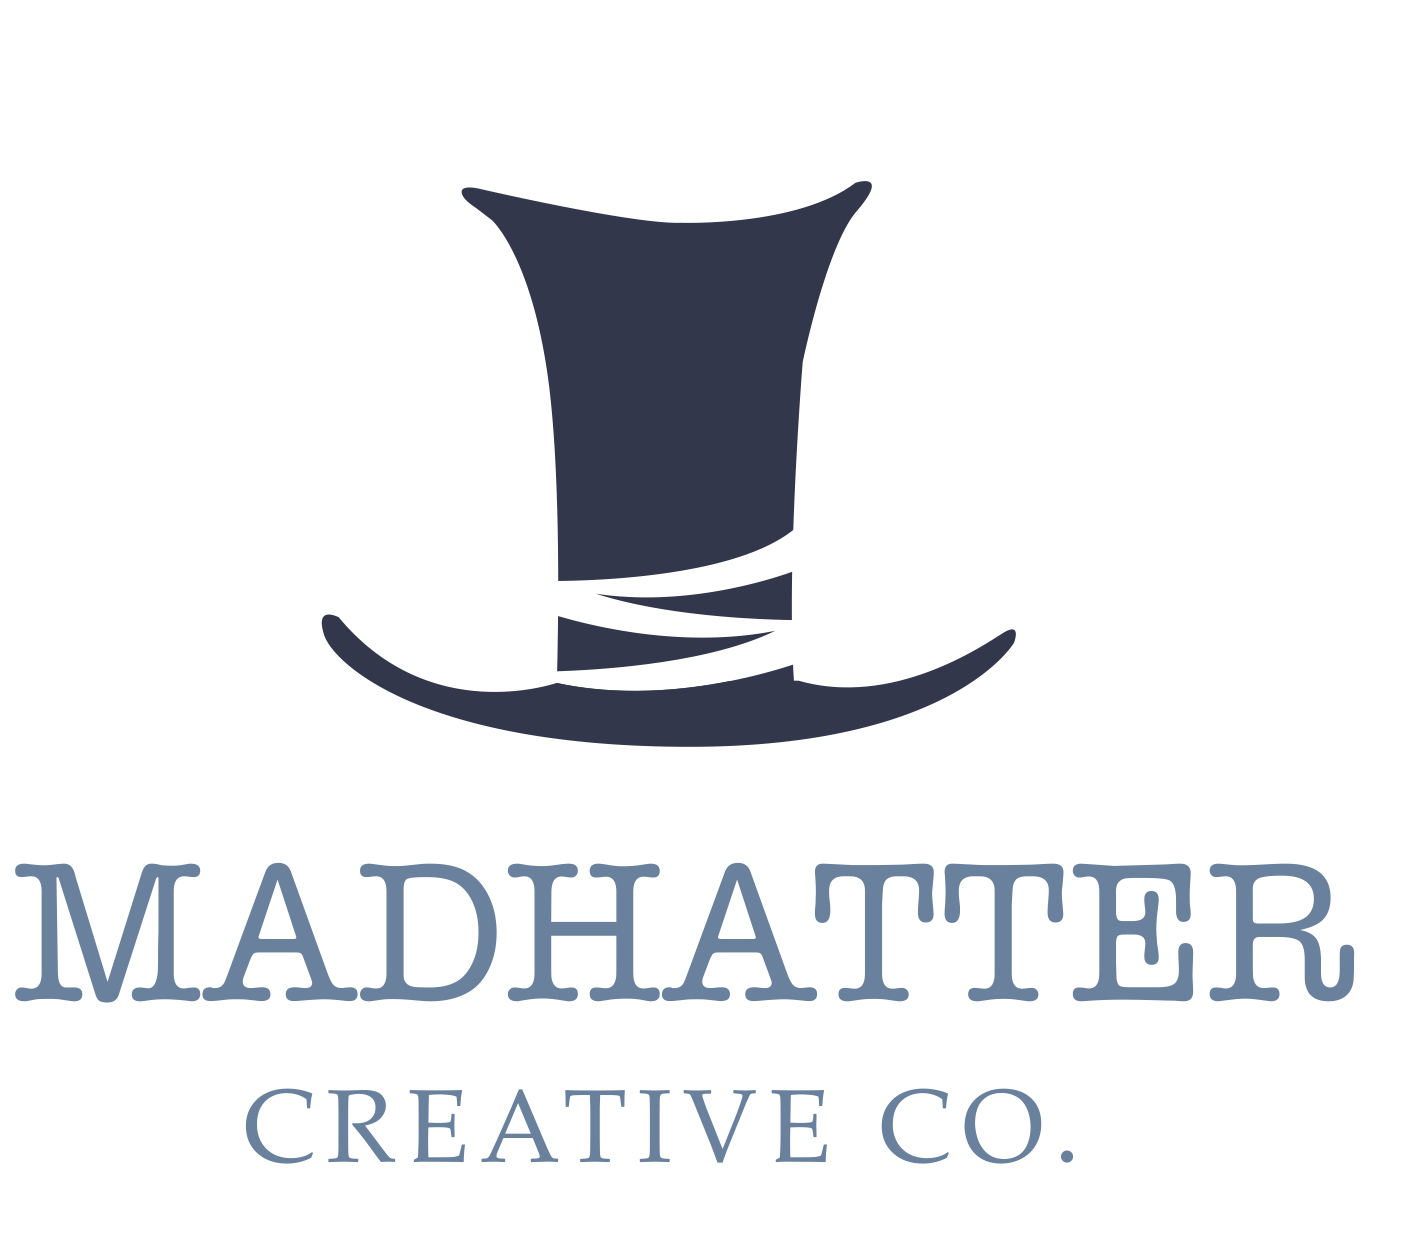 Madhatter Creative Co.